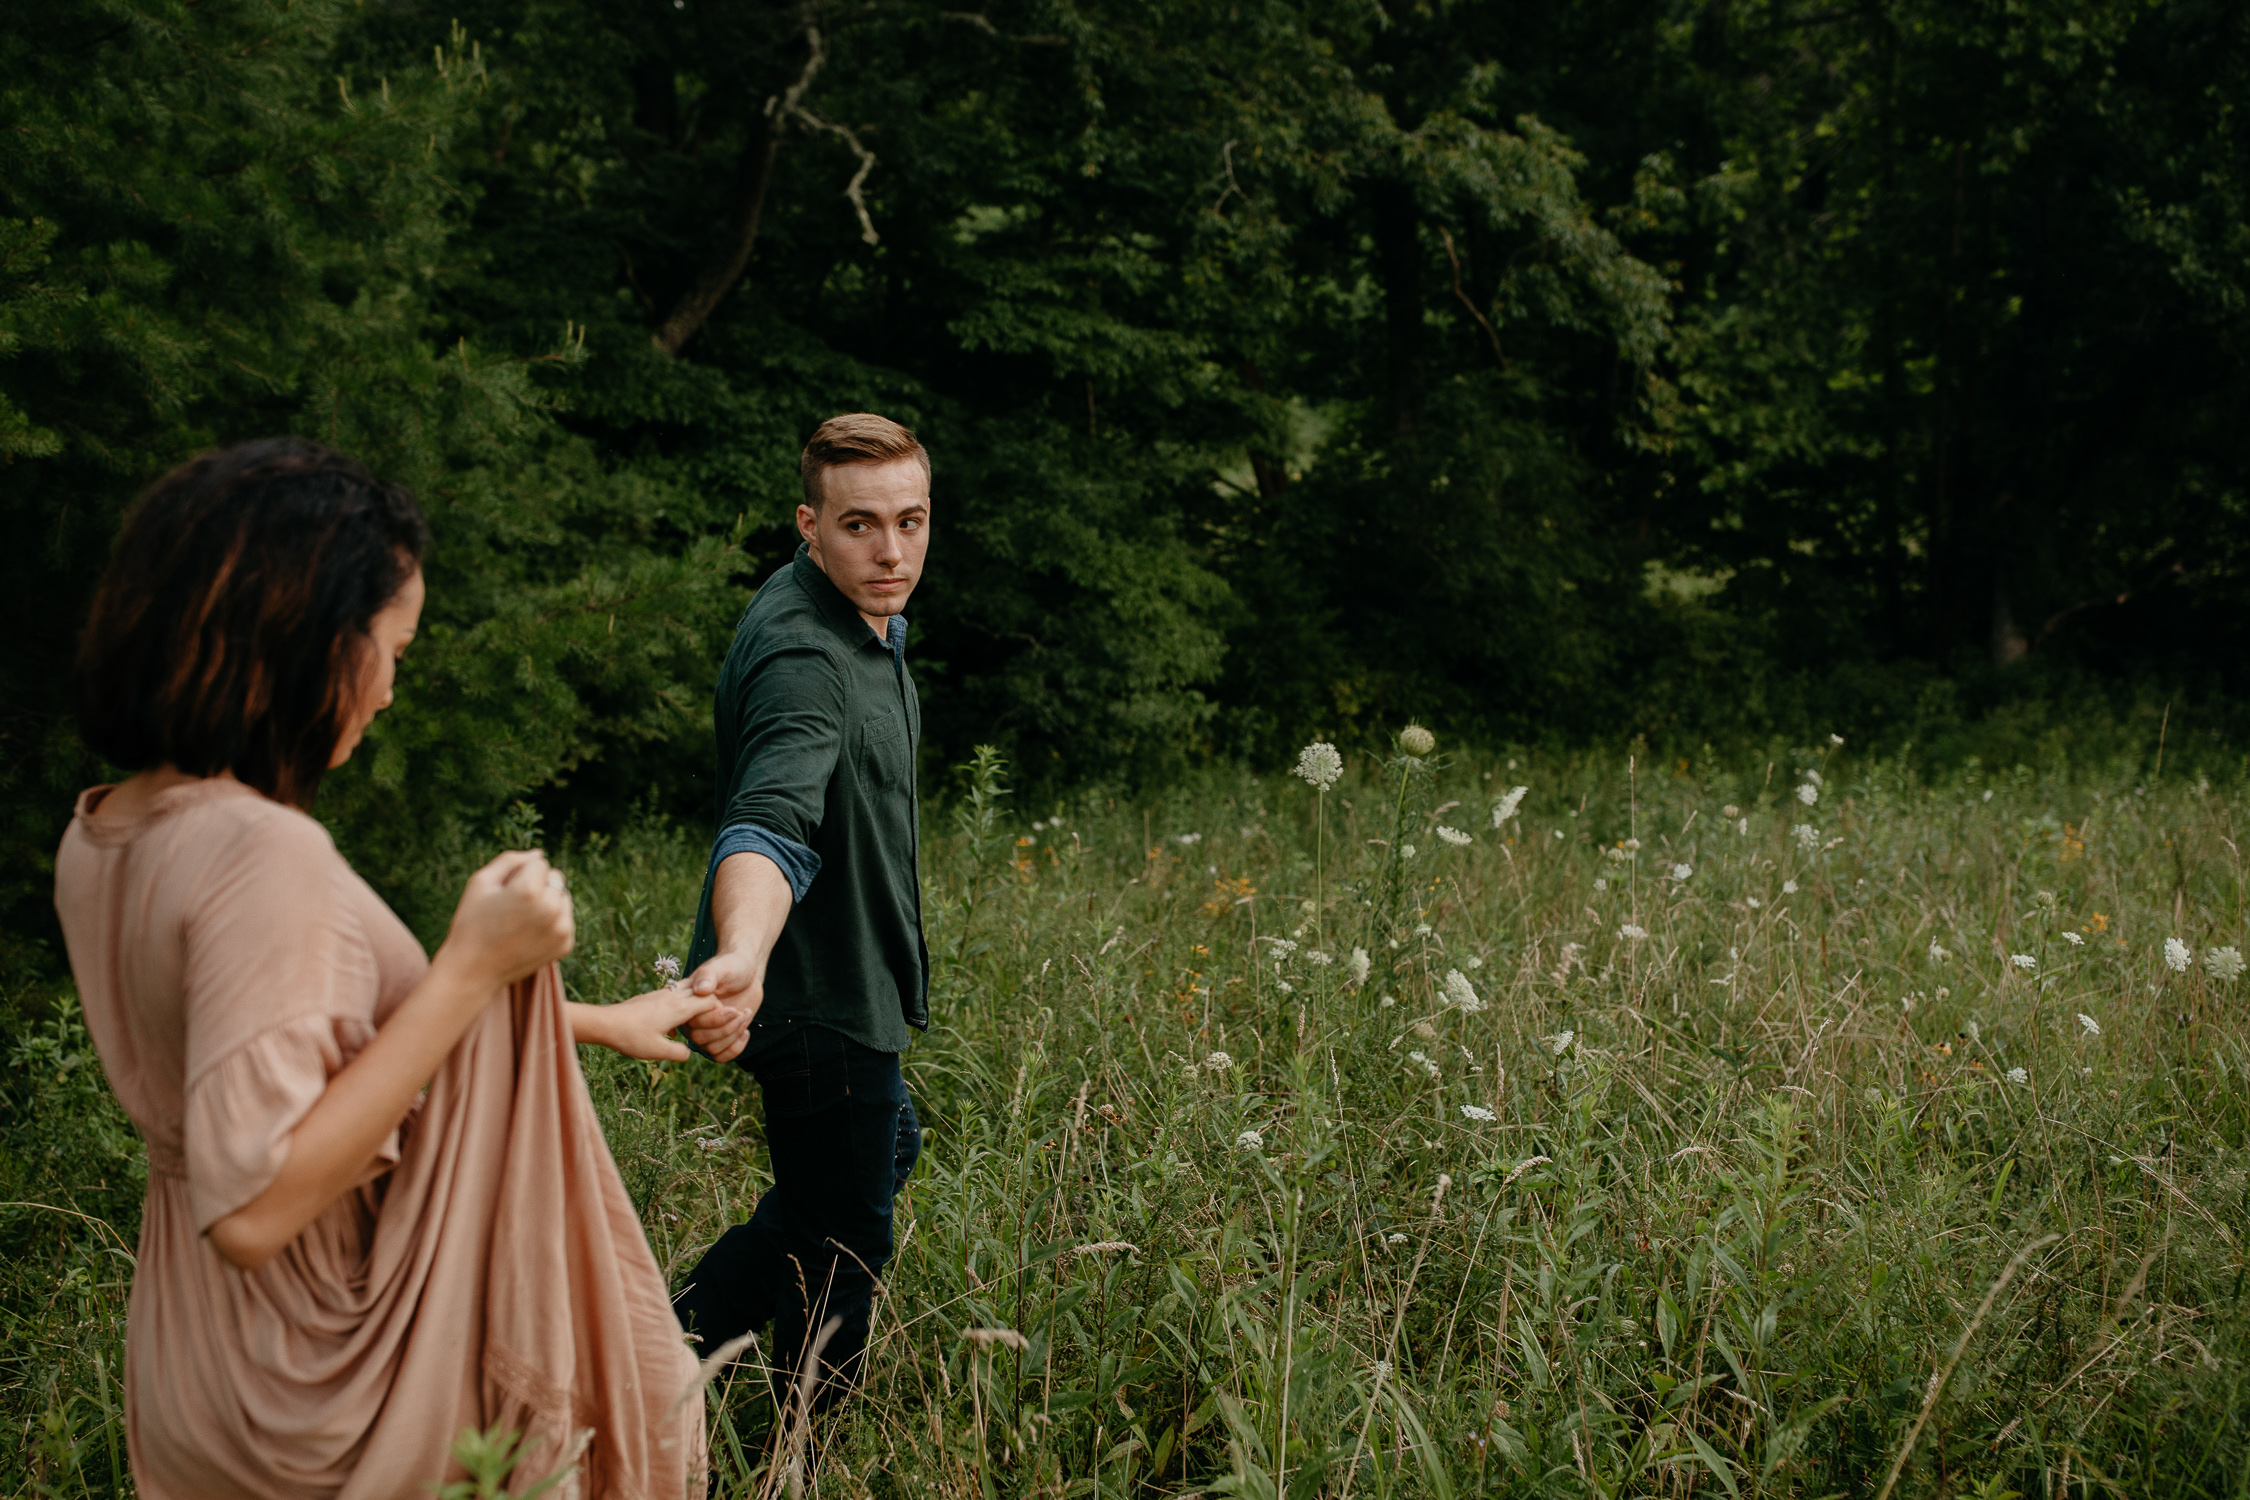 ariannamtorres and isaac engagement session at cades cove smoky mountains elopement-80.jpg